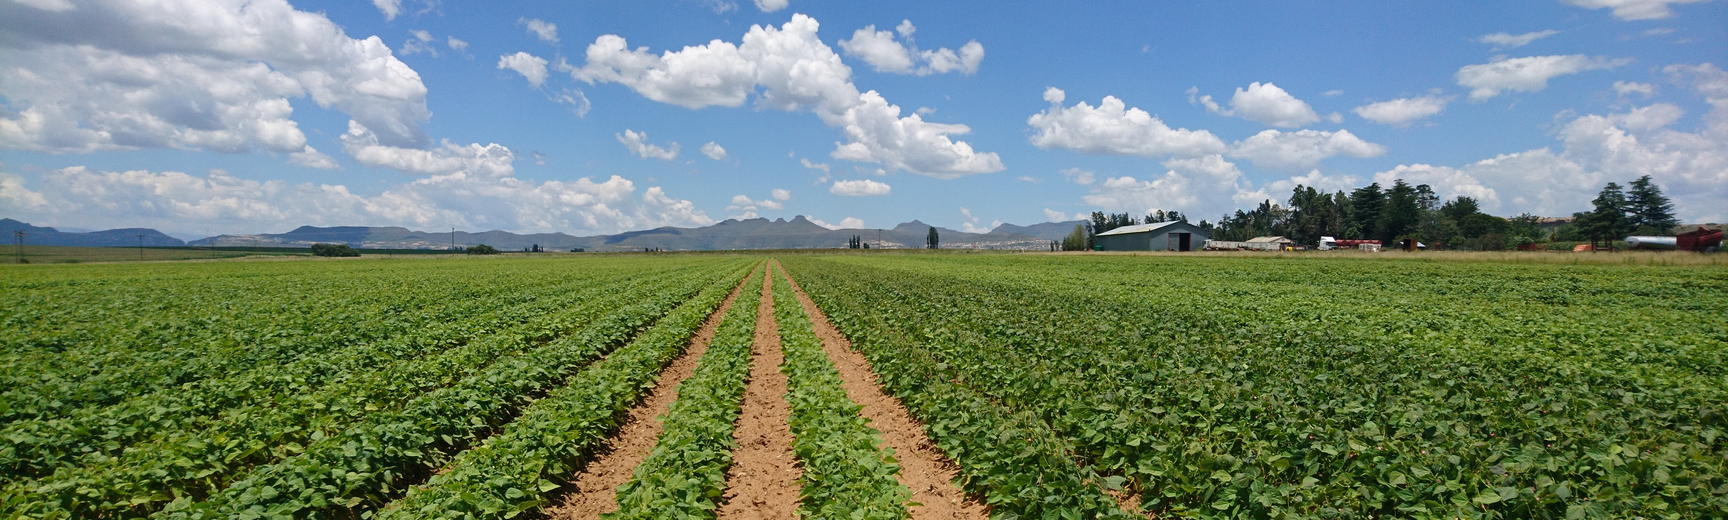 Field of common bean in South Africa